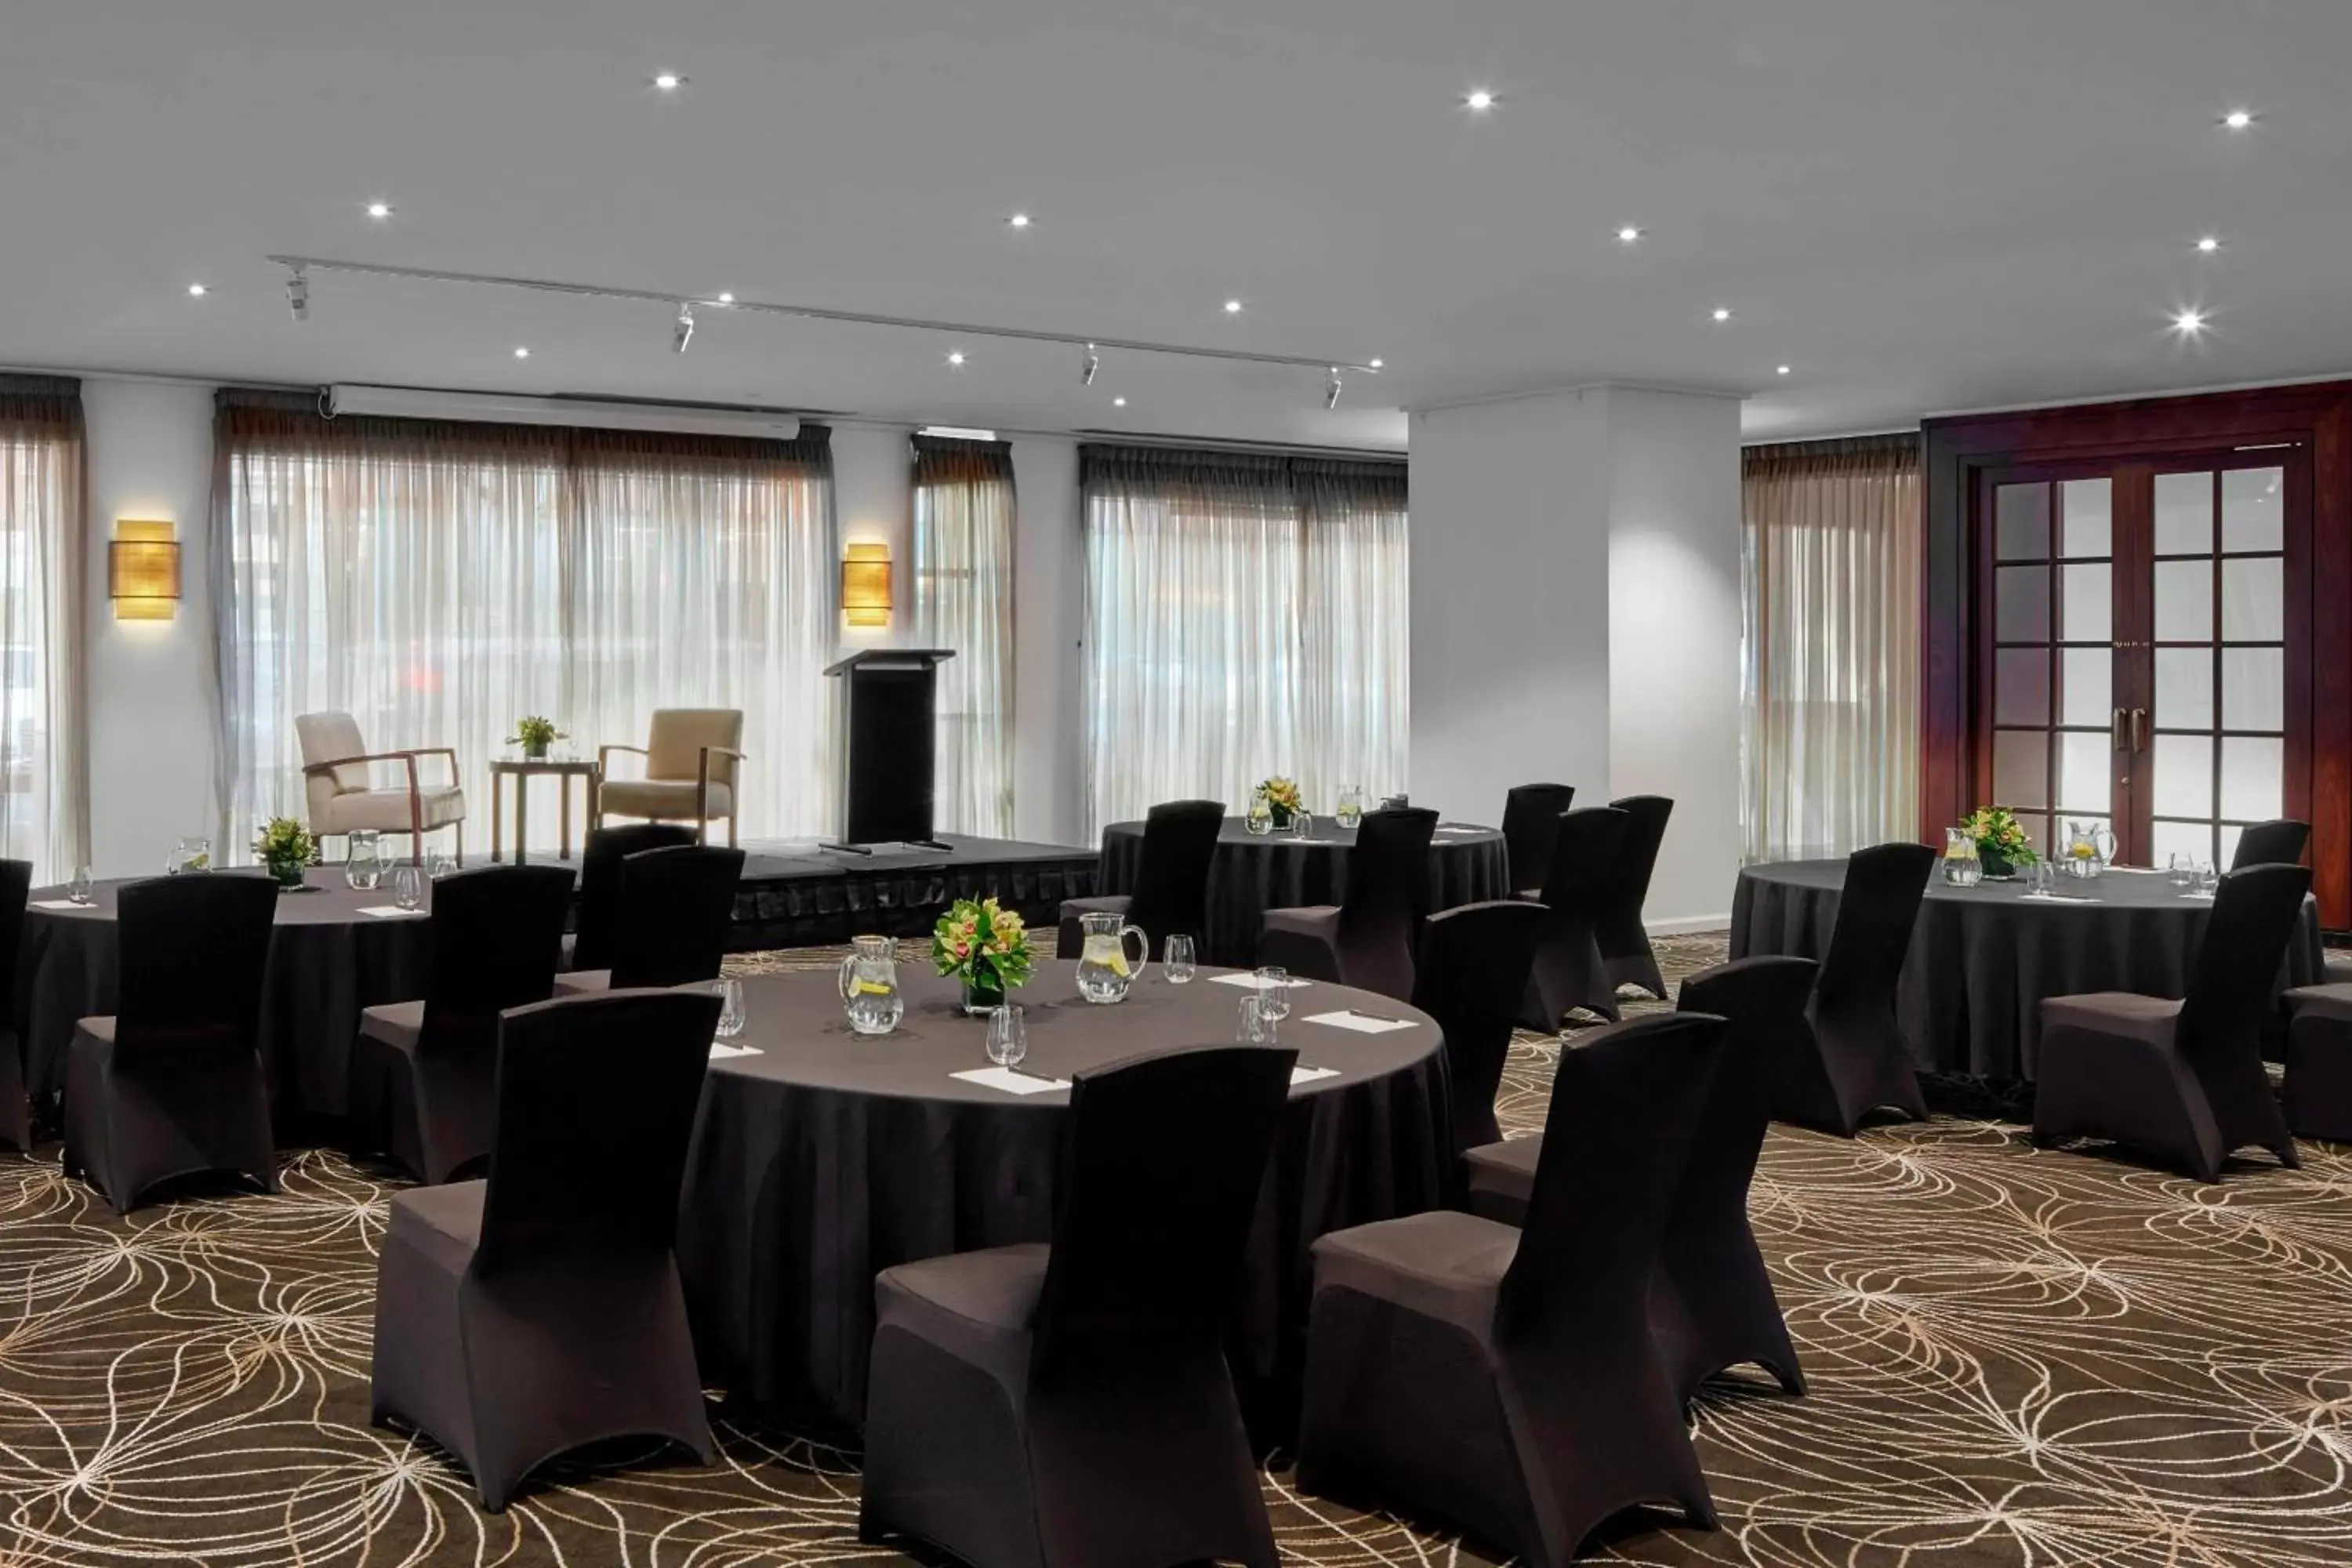 Meeting/conference room, Banquet Facilities in Melbourne Marriott Hotel